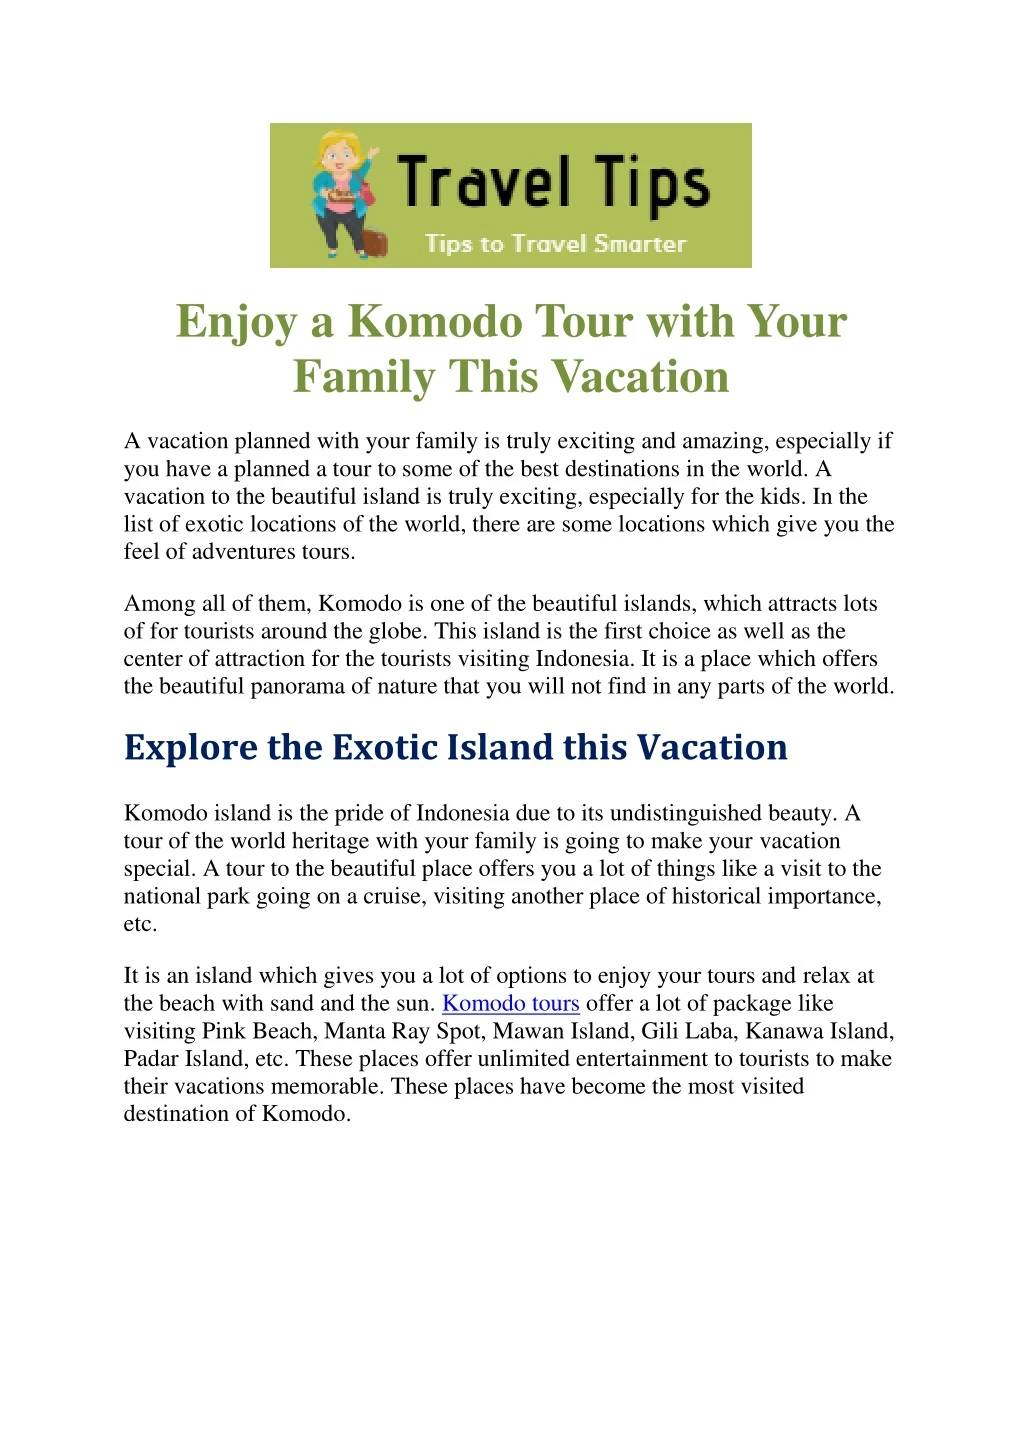 enjoy a komodo tour with your family this vacation